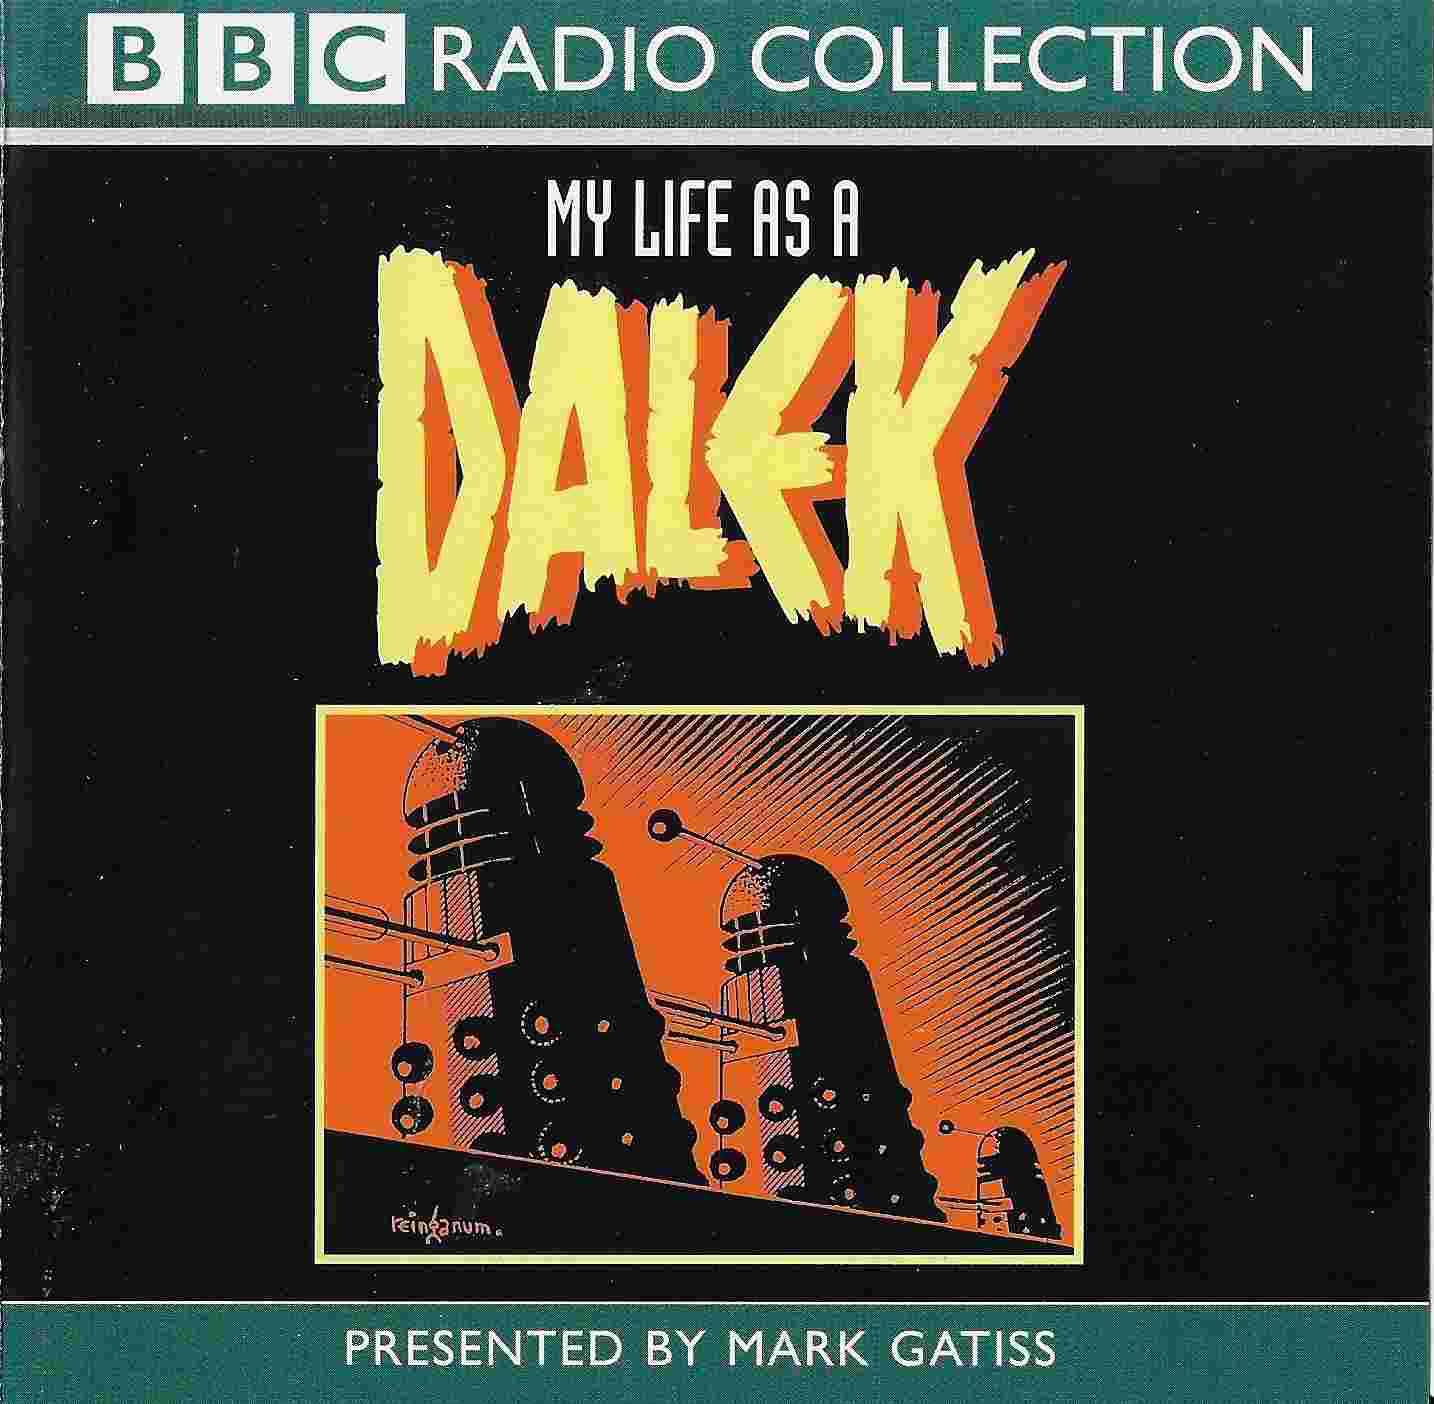 Picture of Doctor Who - My Life as a Dalek by artist Mark Gatiss from the BBC cds - Records and Tapes library